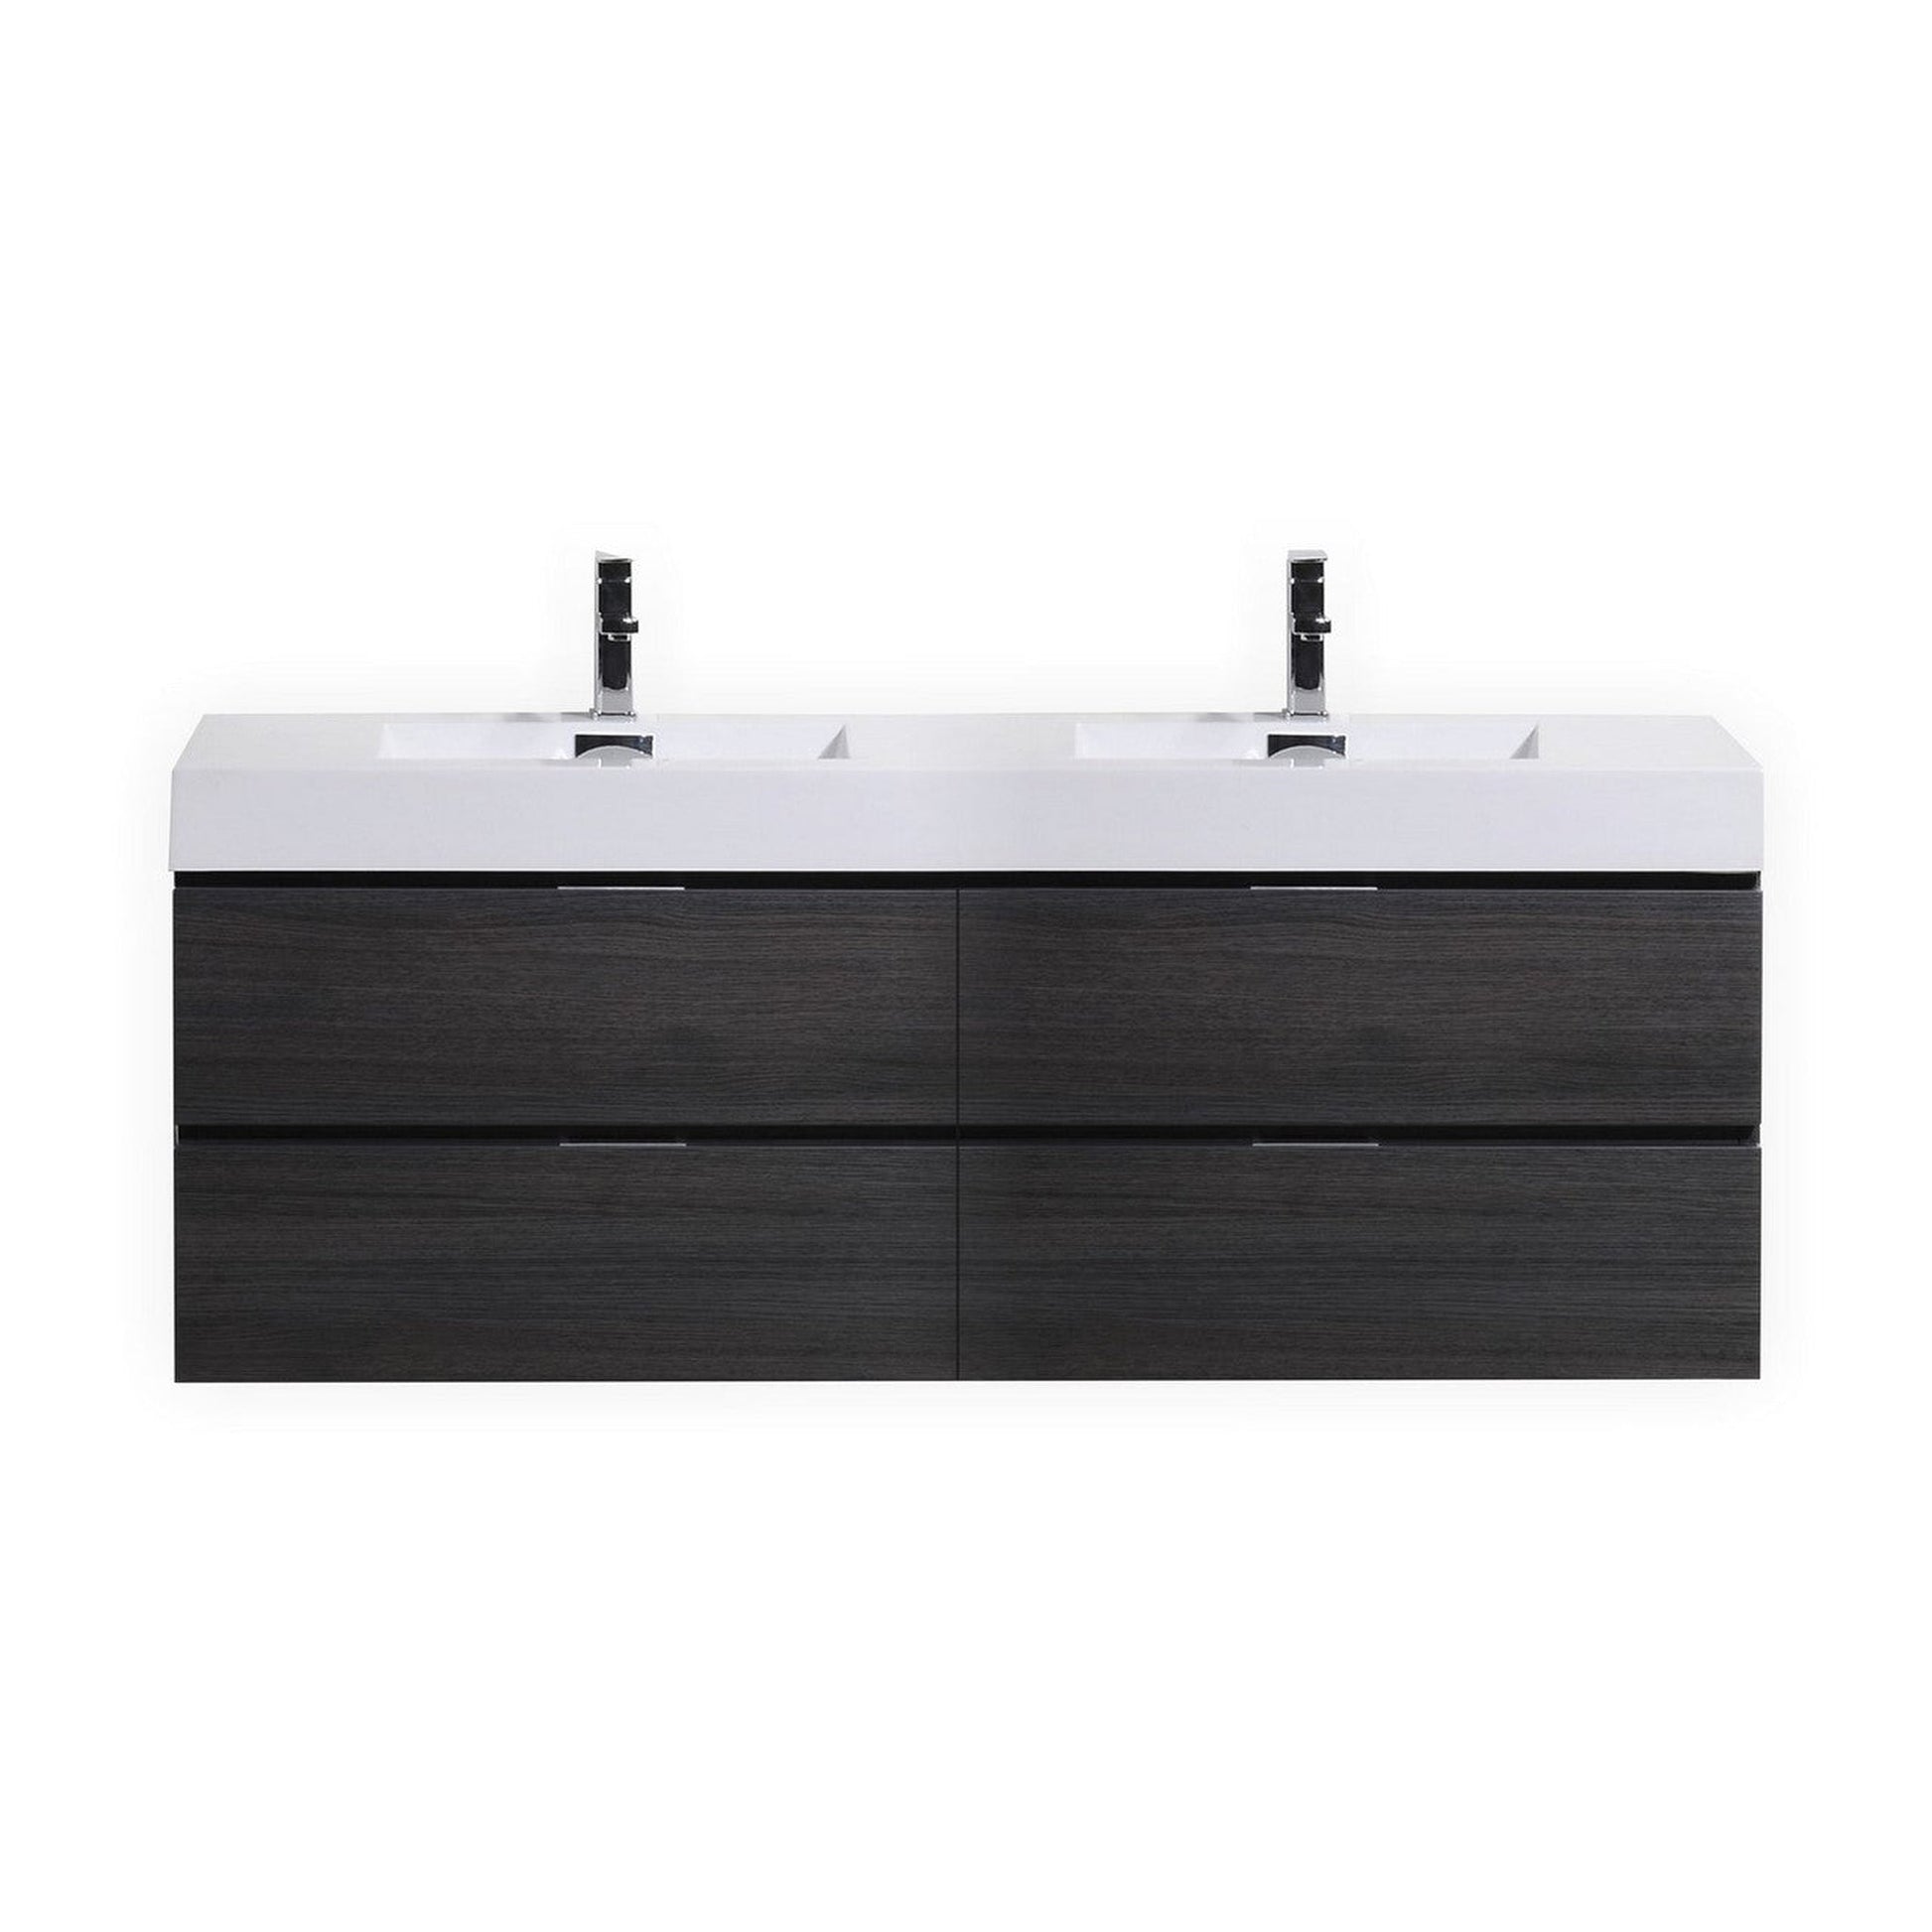 KubeBath Bliss 80" Gray Oak Wall-Mounted Modern Bathroom Vanity With Double Integrated Acrylic Sink With Overflow and 22" Gray Oak Framed Two Mirrors With Shelf